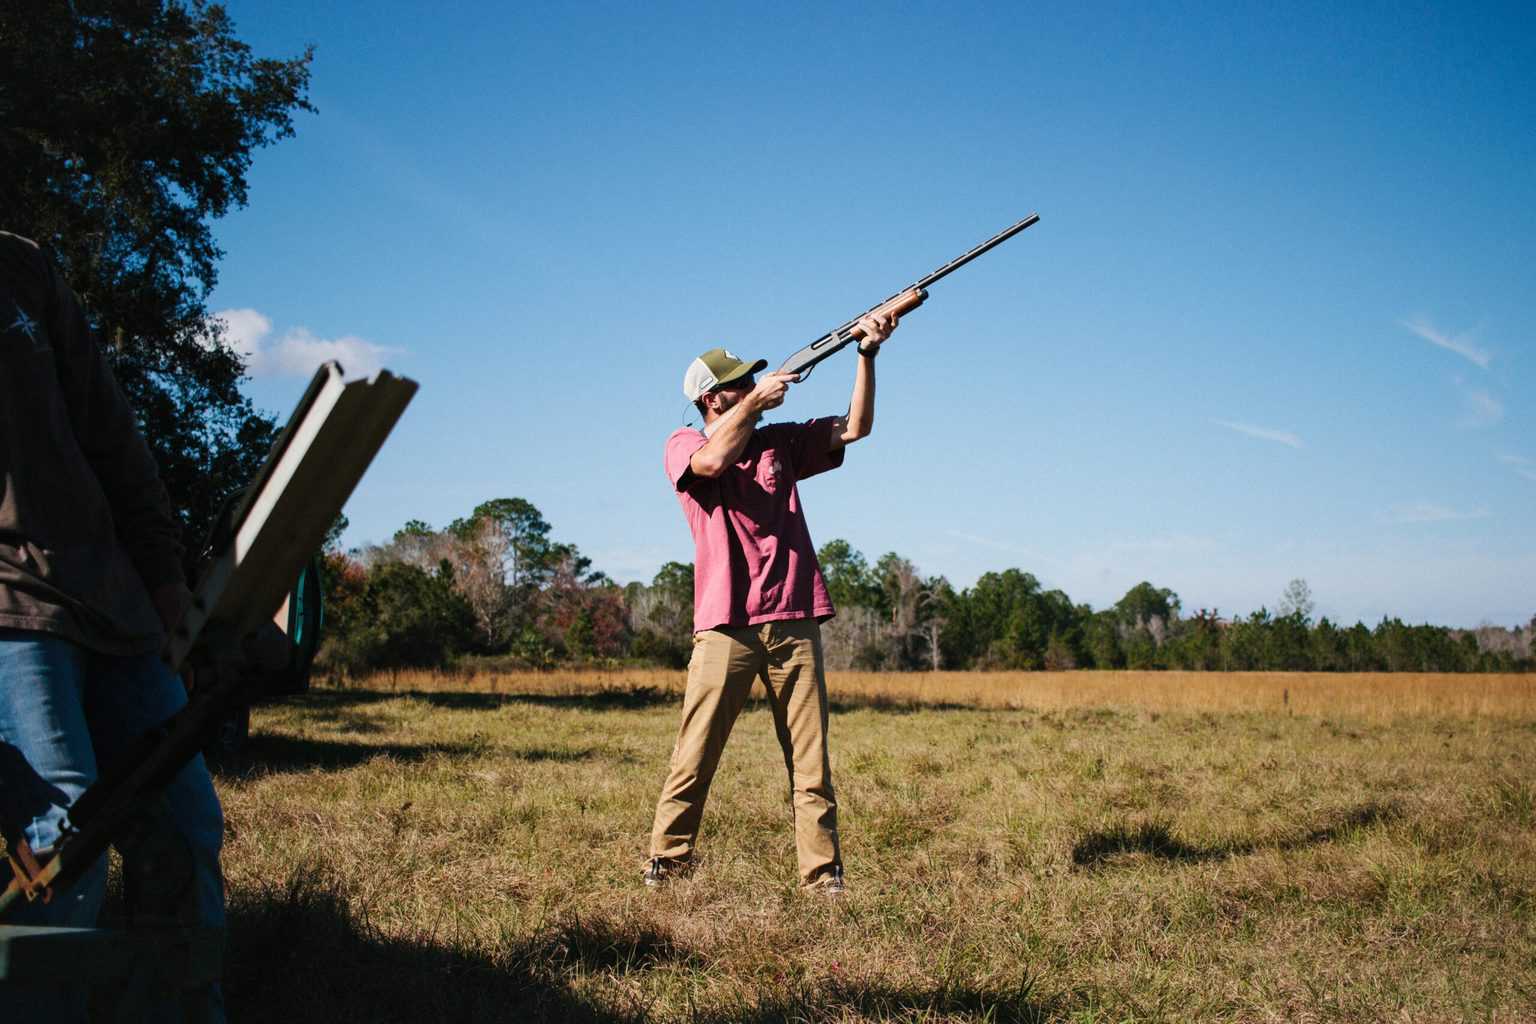 A man aiming a shotgun to the sky in an open field